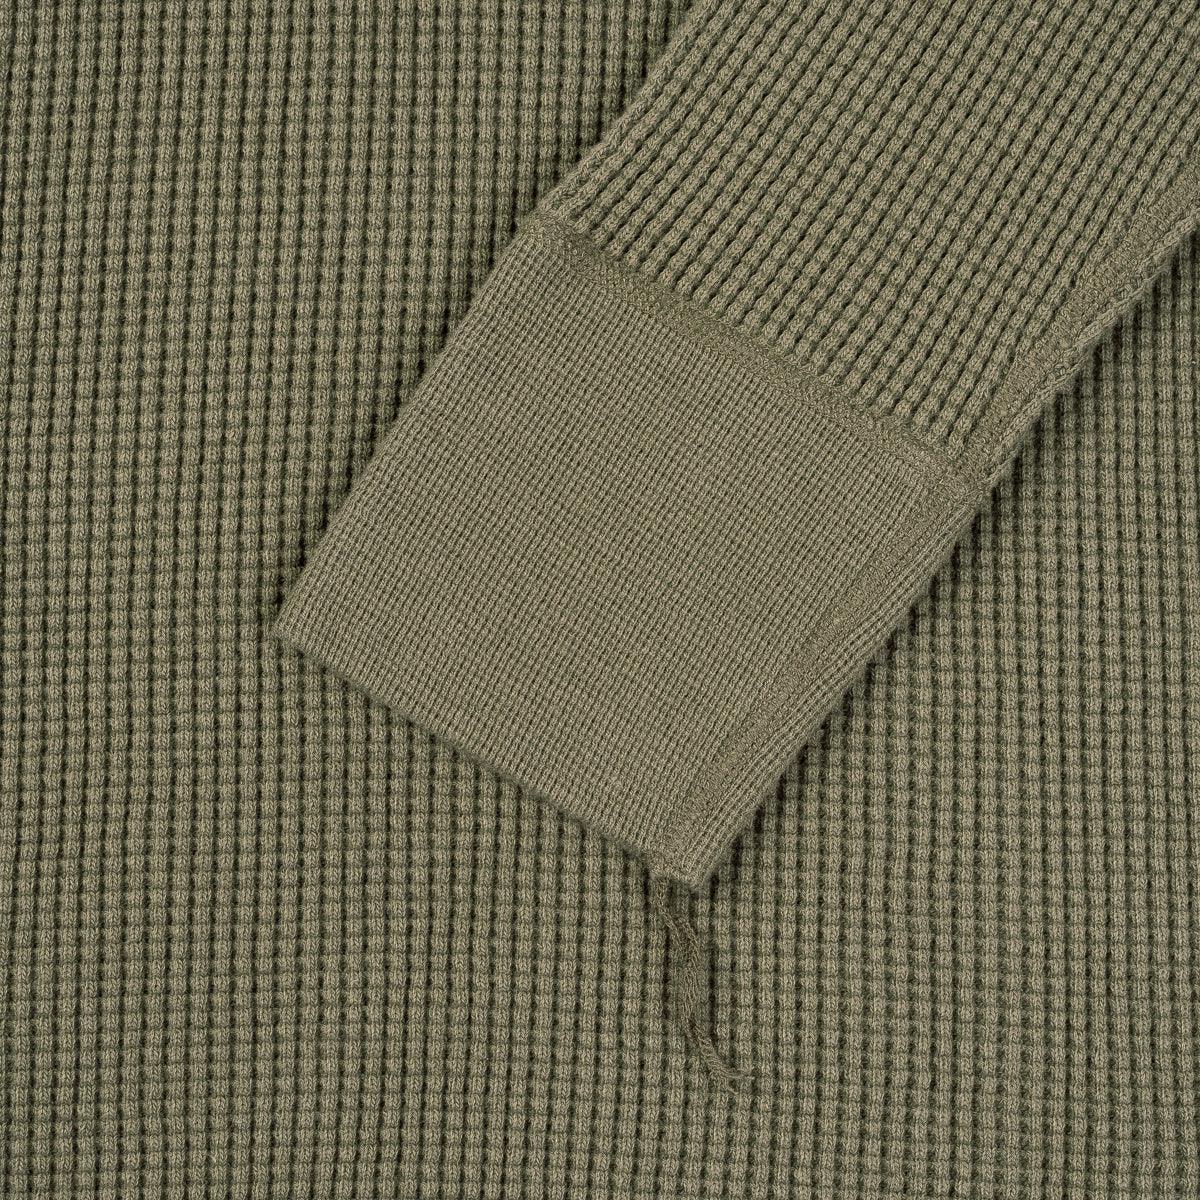 Image showing the IHTL-1301-OLV - Waffle Knit Long Sleeved Crew Neck Olive which is a T-Shirts described by the following info Back In, IHSALE_M23, Iron Heart, Released, T-Shirts, Tops and sold on the IRON HEART GERMANY online store